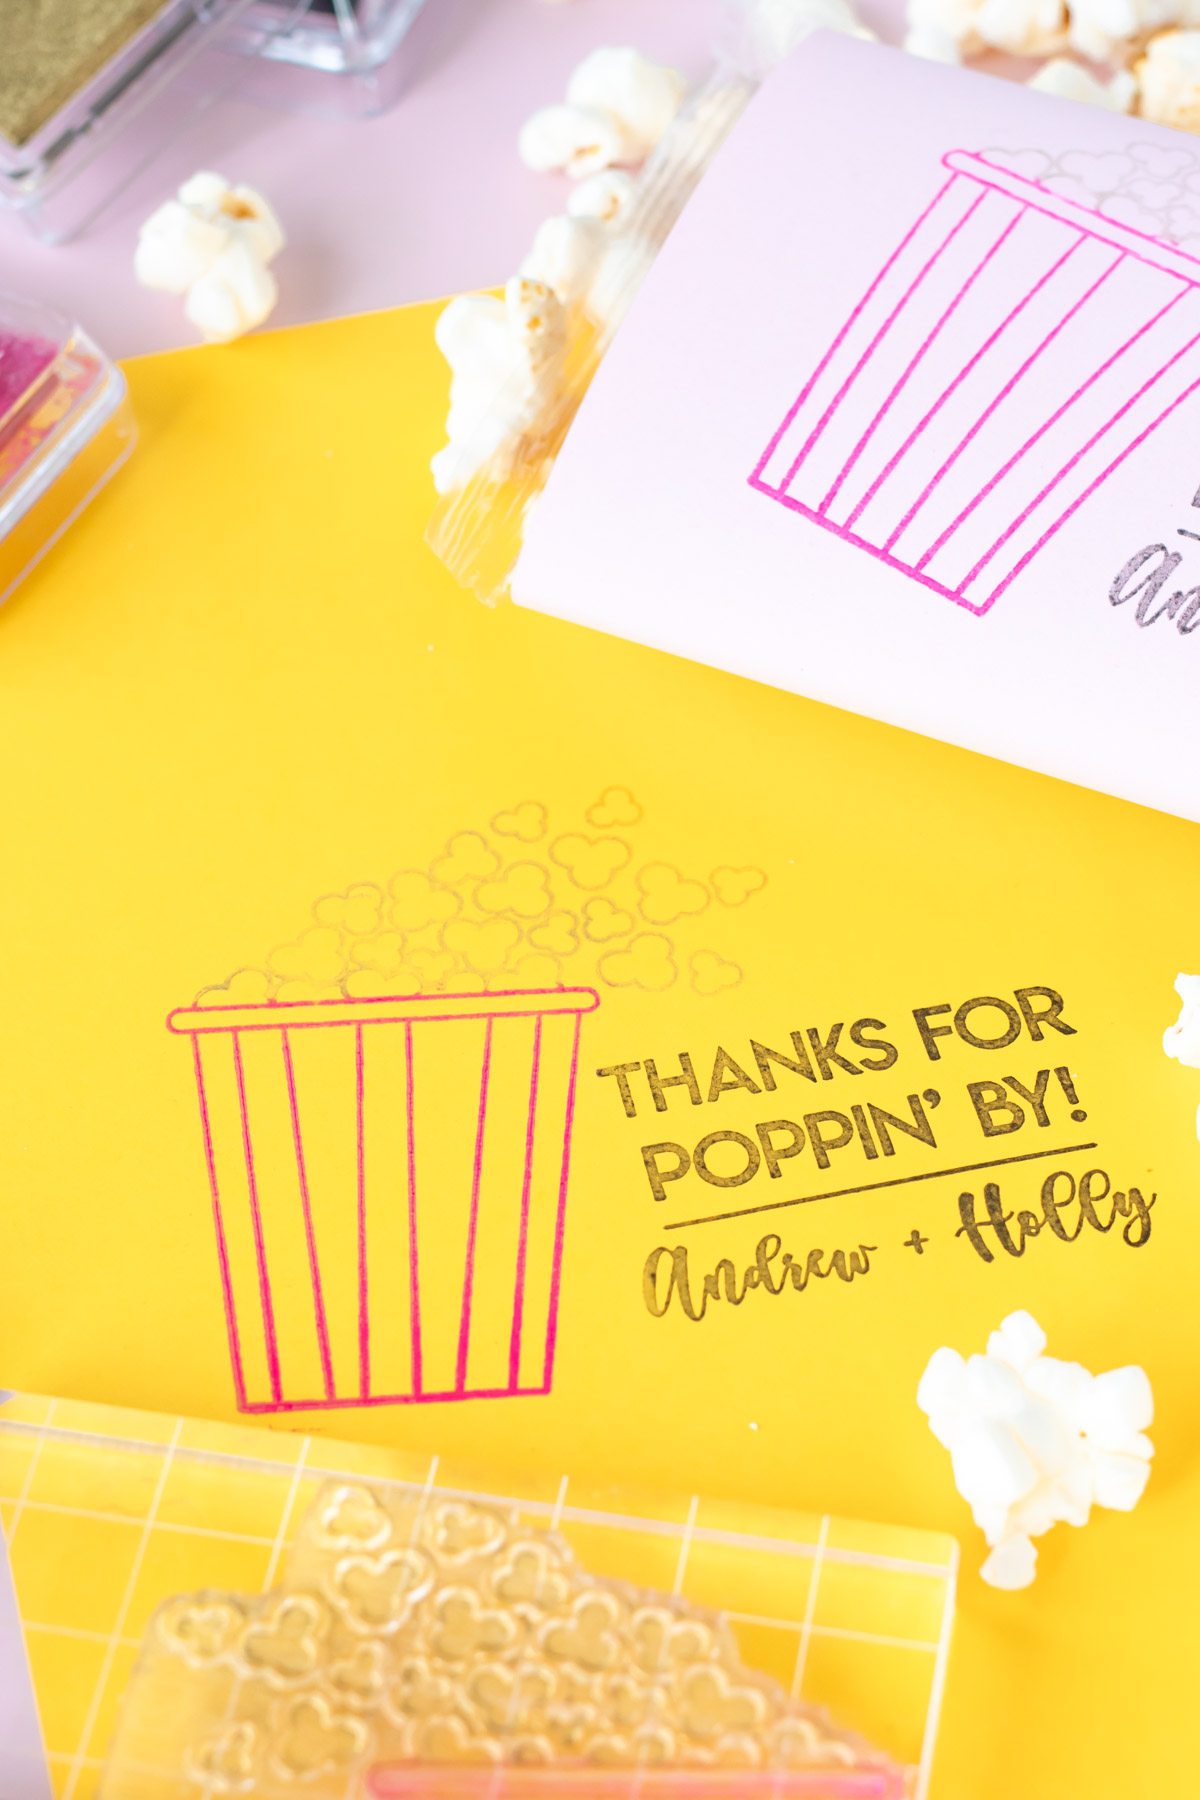 DIY Stamped Popcorn Favors for Weddings | Make your own DIY wedding favors with microwave popcorn! These cute "thanks for POPPING by" popcorn wedding favors use a custom stamp from RubberStamps.com to make a favor guests can easily enjoy at home! #ad #weddingdiy #weddingfavor #partyfavor #stamping #popcorn #papercrafts #diyparty #handmadewedding #colorfulwedding